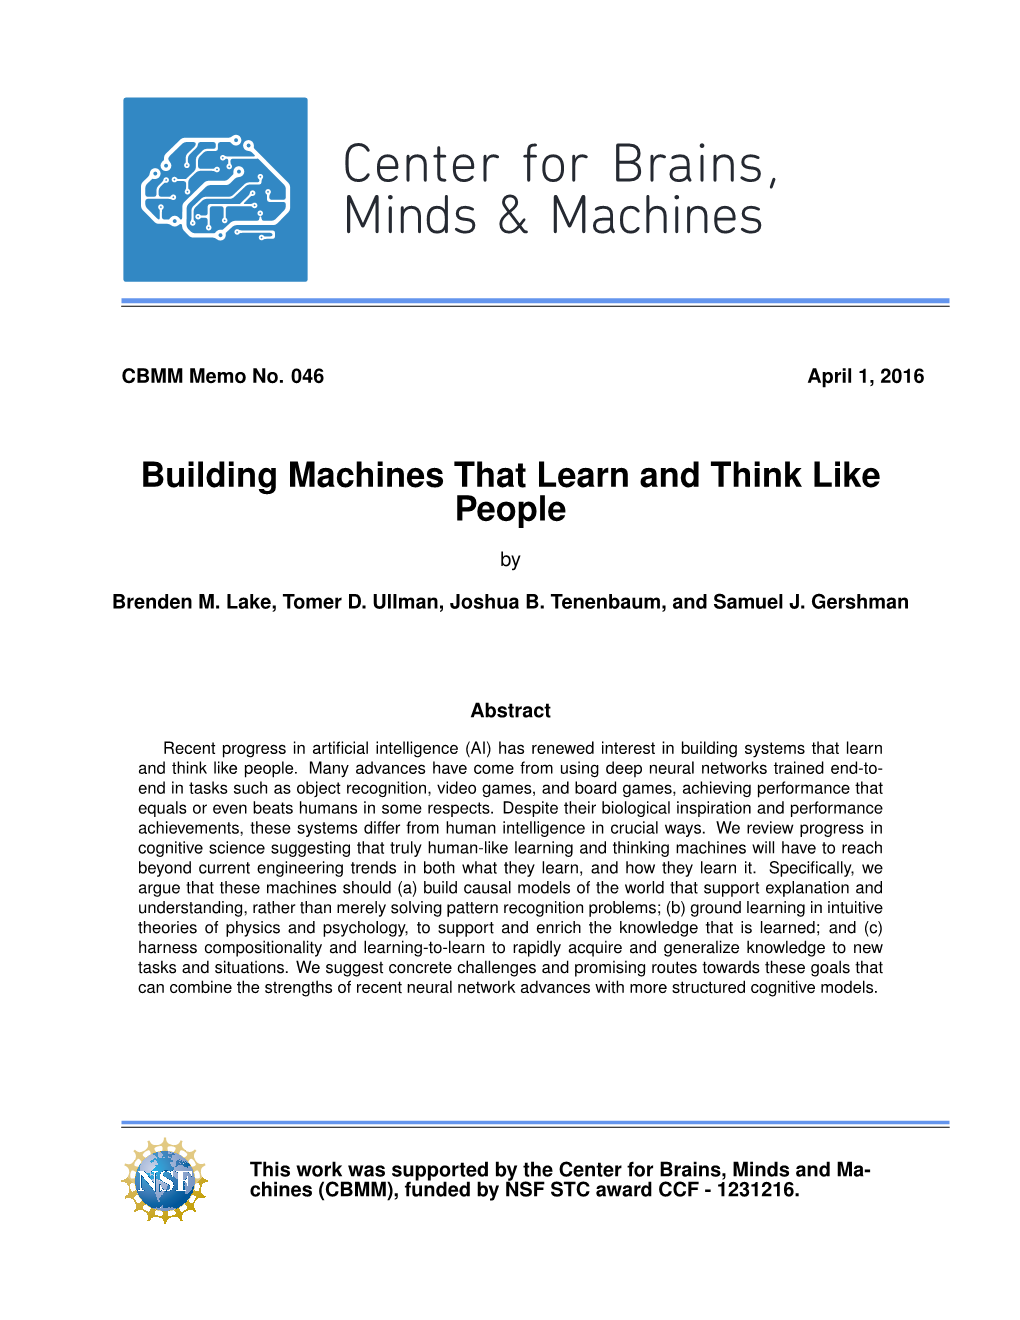 Building Machines That Learn and Think Like People